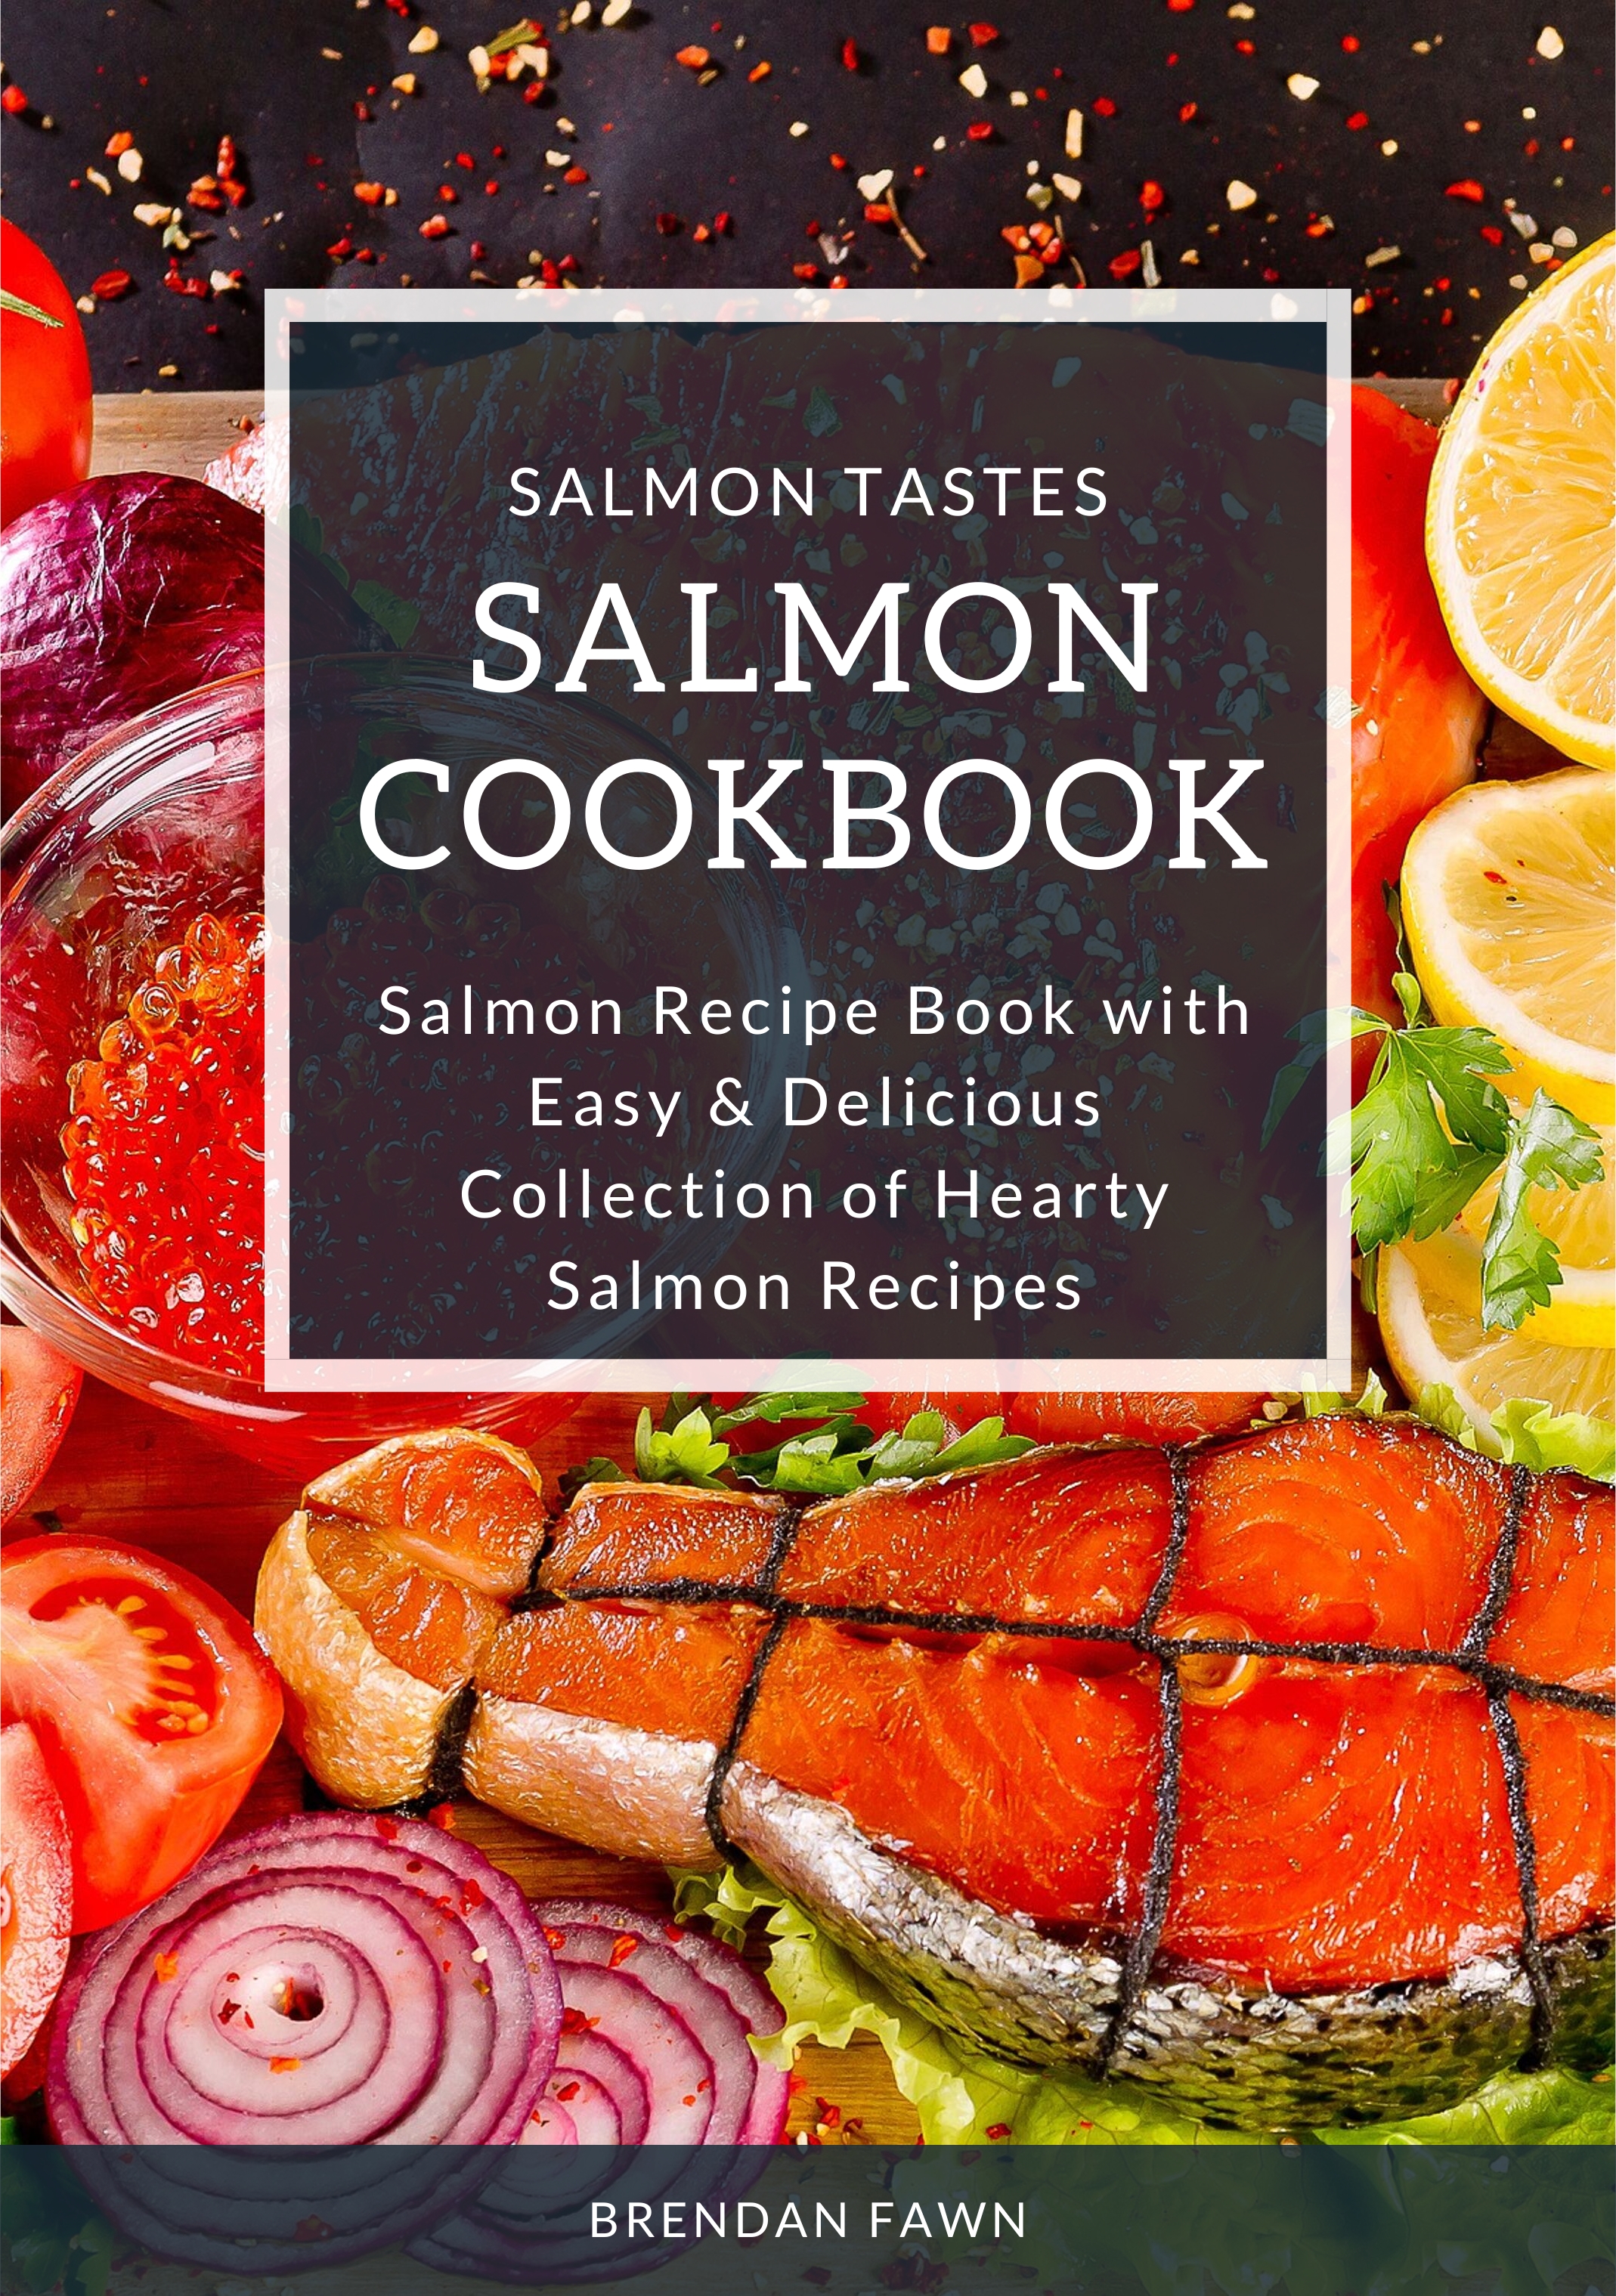 FREE: Salmon Cookbook: Salmon Recipe Book with Easy & Delicious Collection of Hearty Salmon Recipes by Brendan Fawn